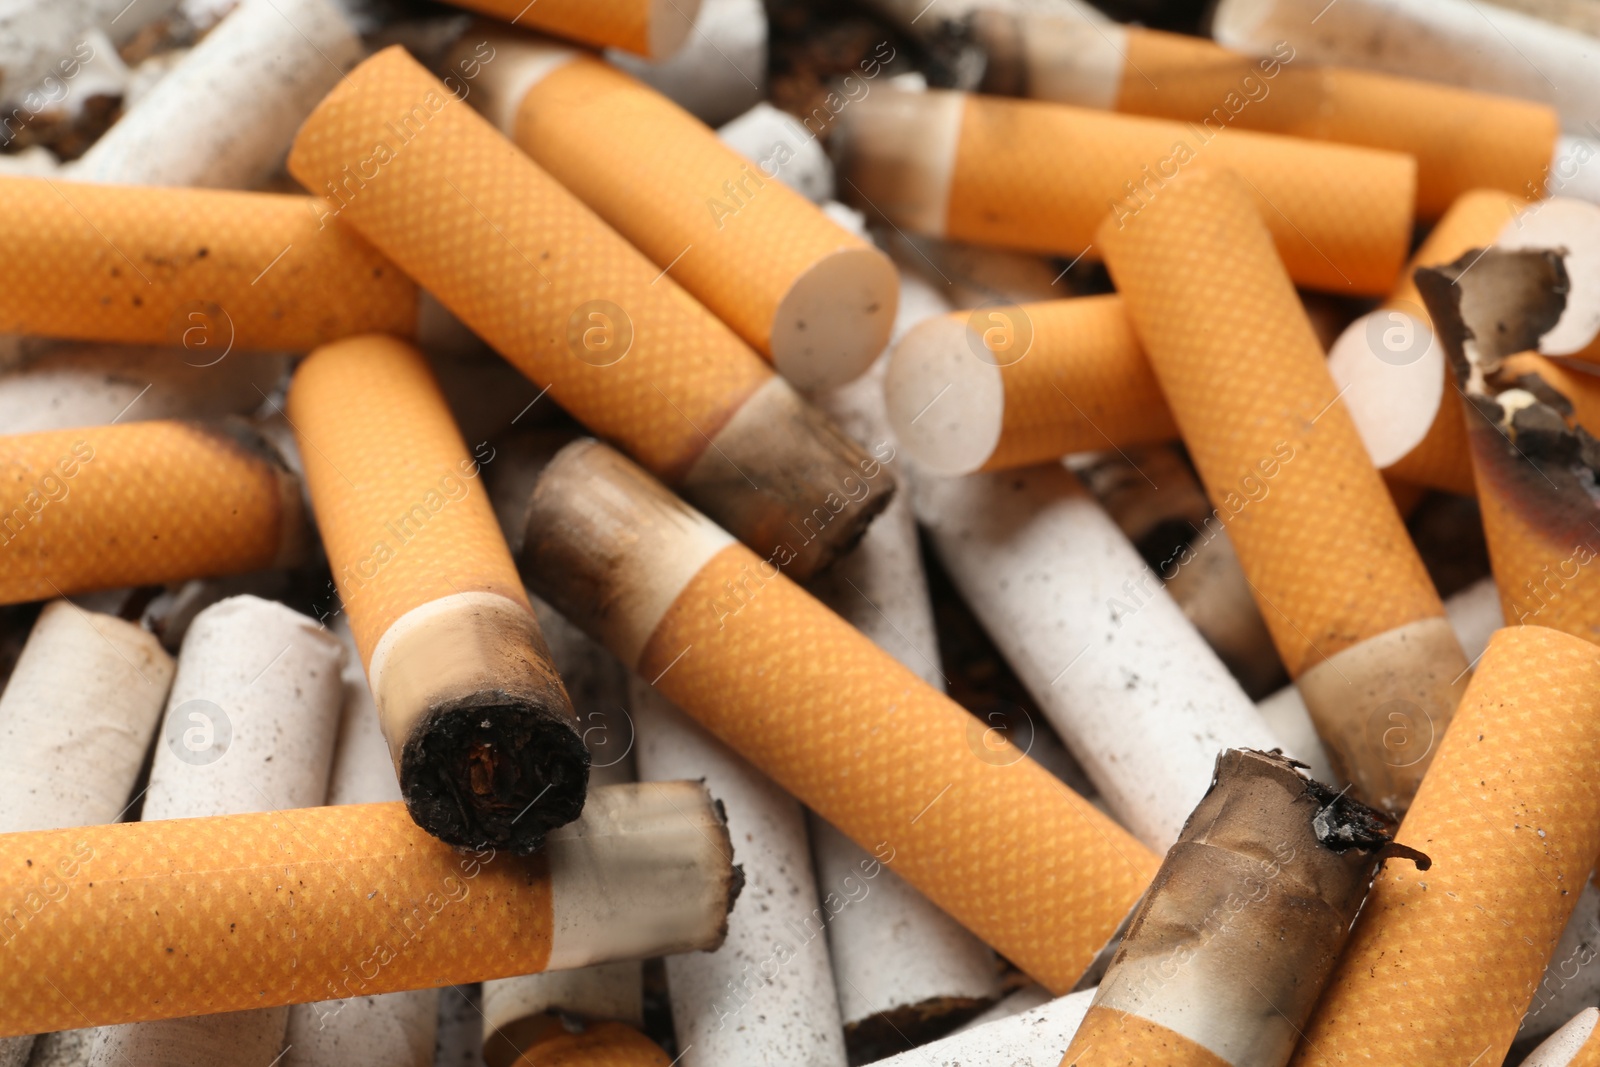 Photo of Pile of cigarette stubs as background, closeup view